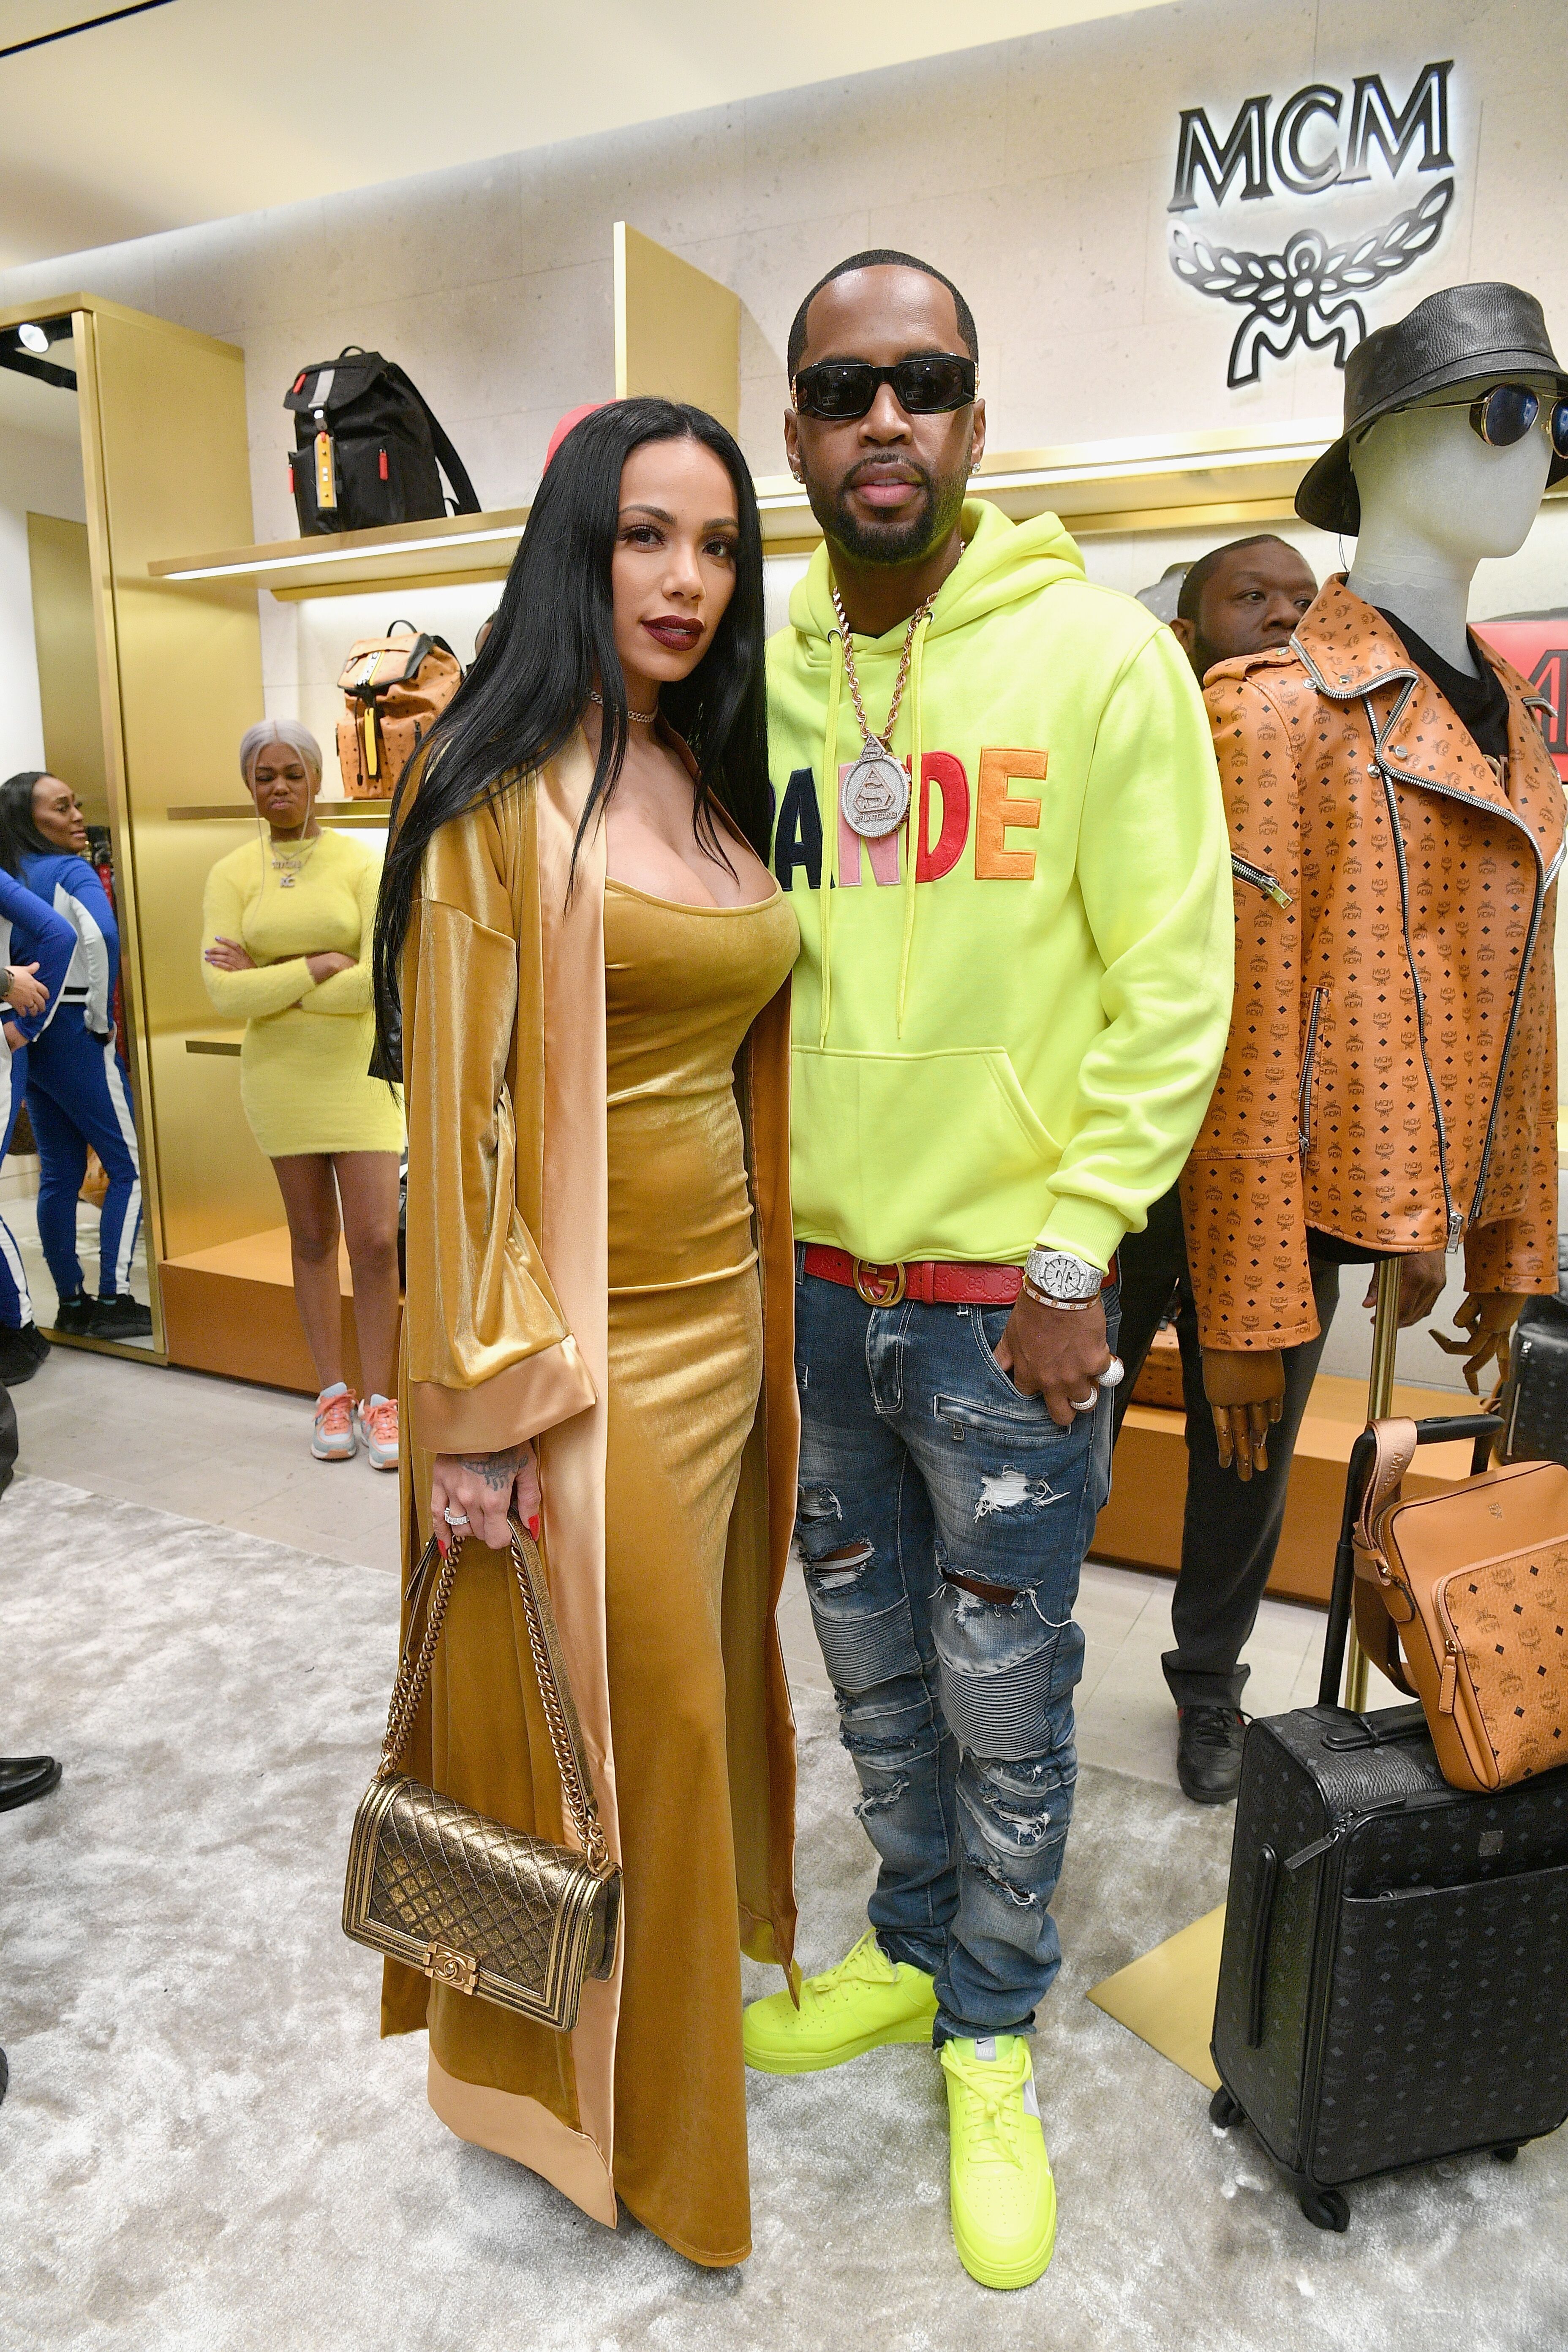 Safaree Samuels and Erica Mena out shopping at MCM/ Source: Getty Images